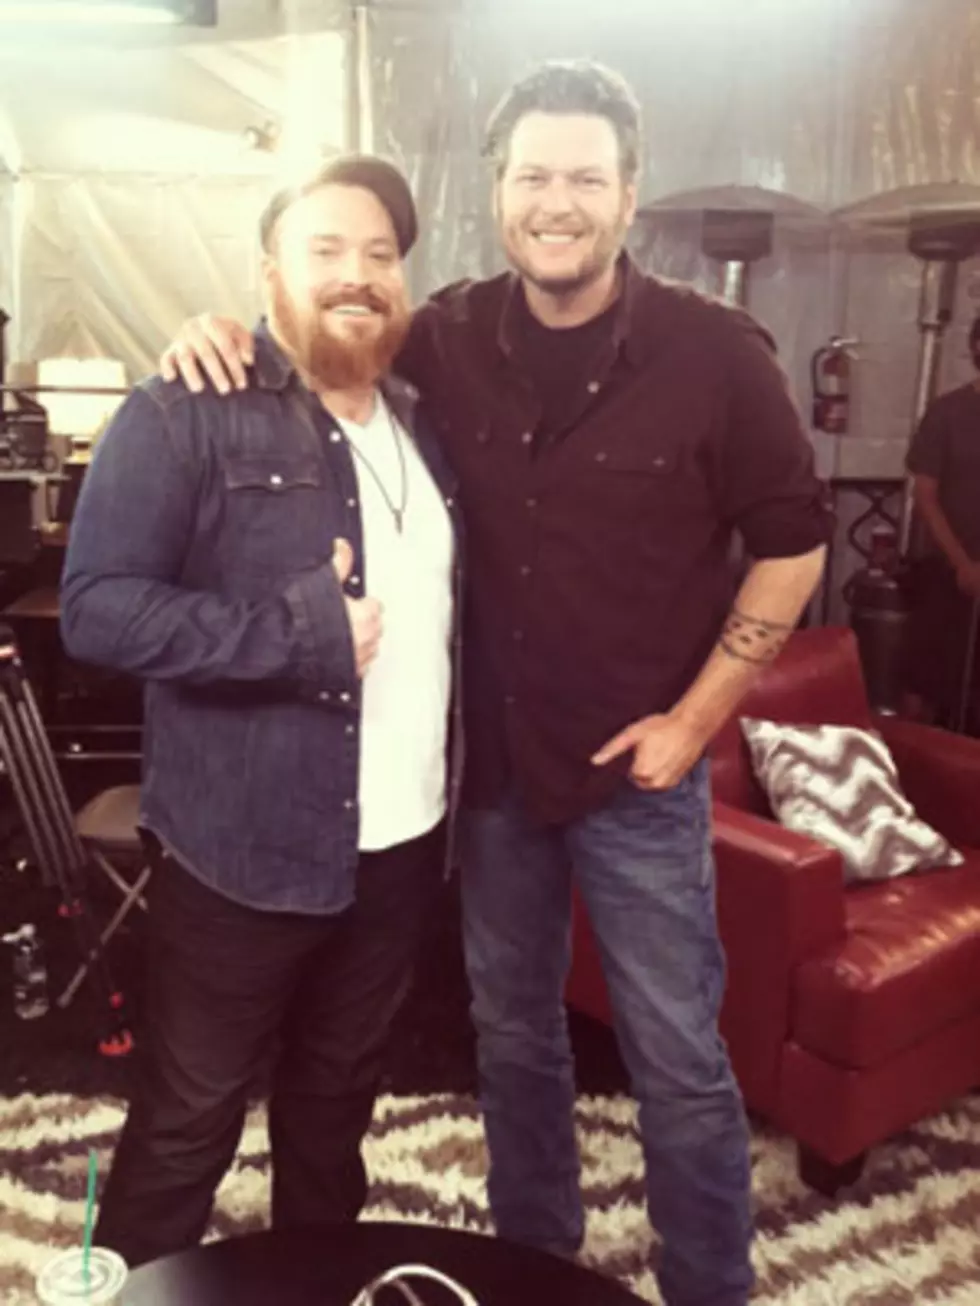 Top 10 &#8216;The Voice&#8217; Contestant Austin Jenckes Excited to Be on Team Blake